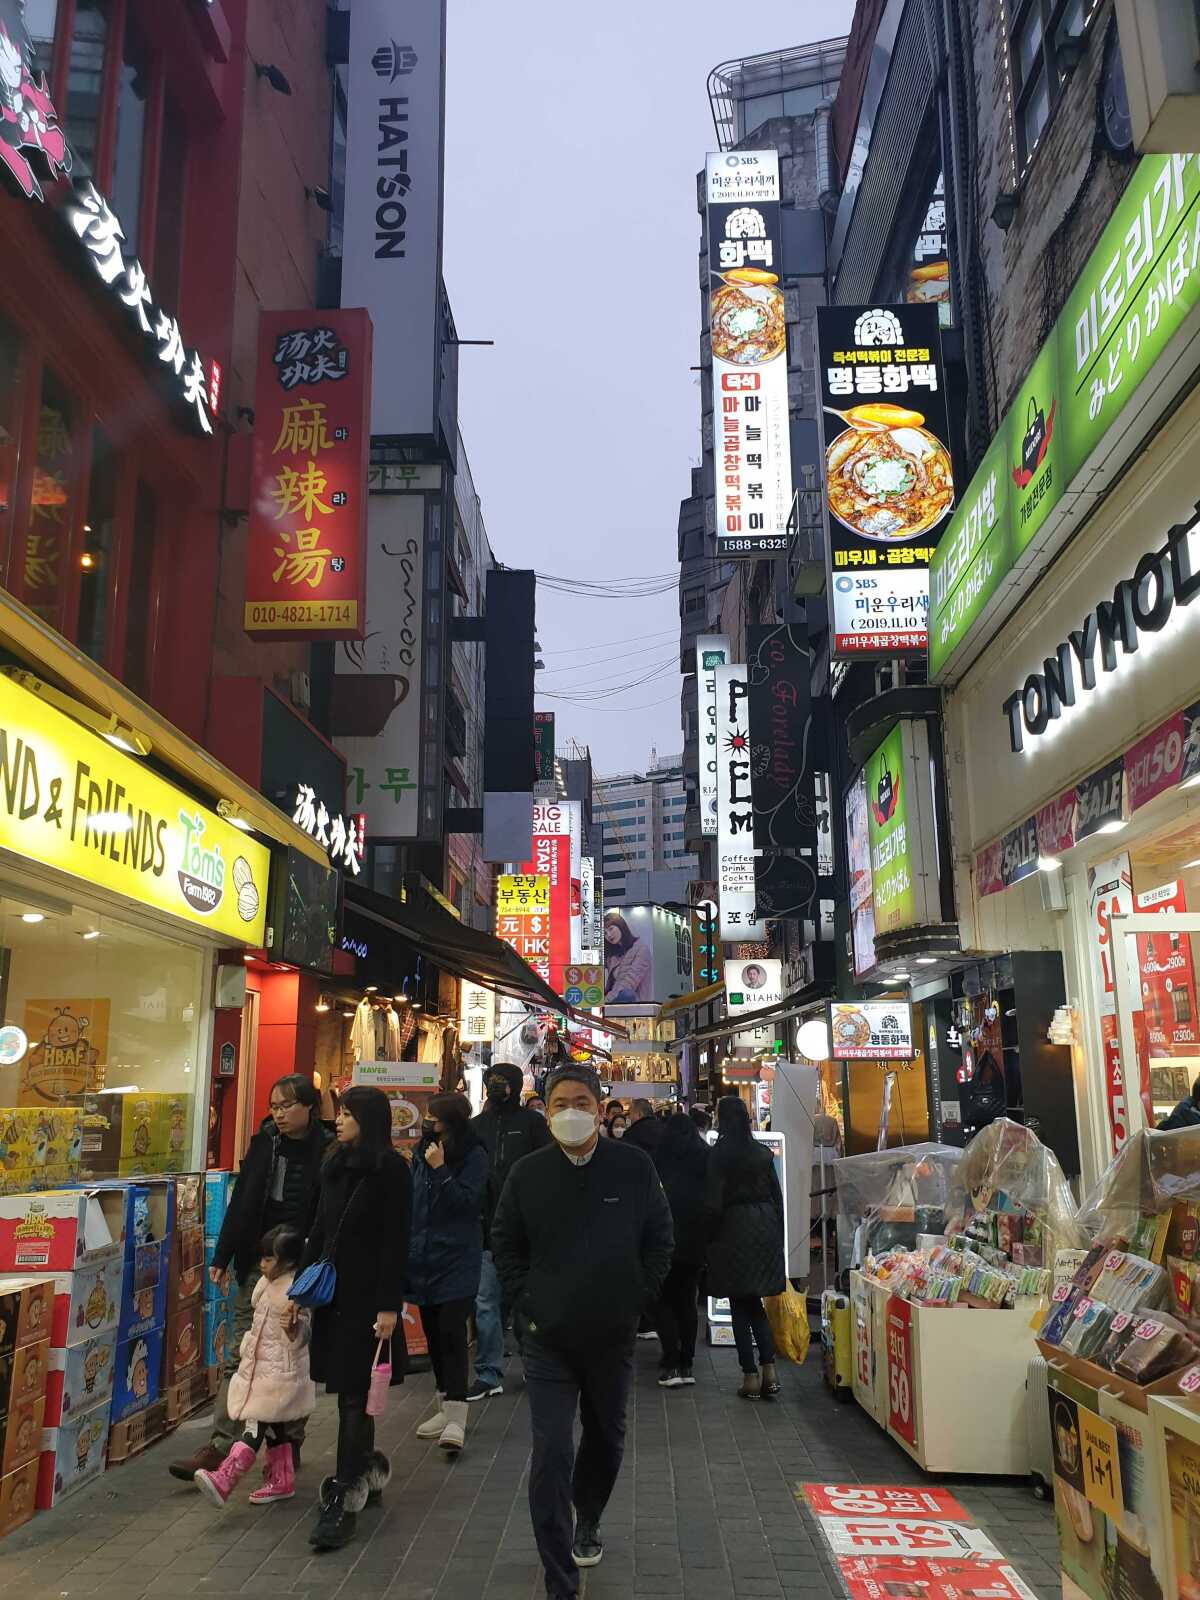 Tourists walk through a busy shopping street in the district of Myeongdong in central Seoul, a popular destination among Chinese visitors to the country.